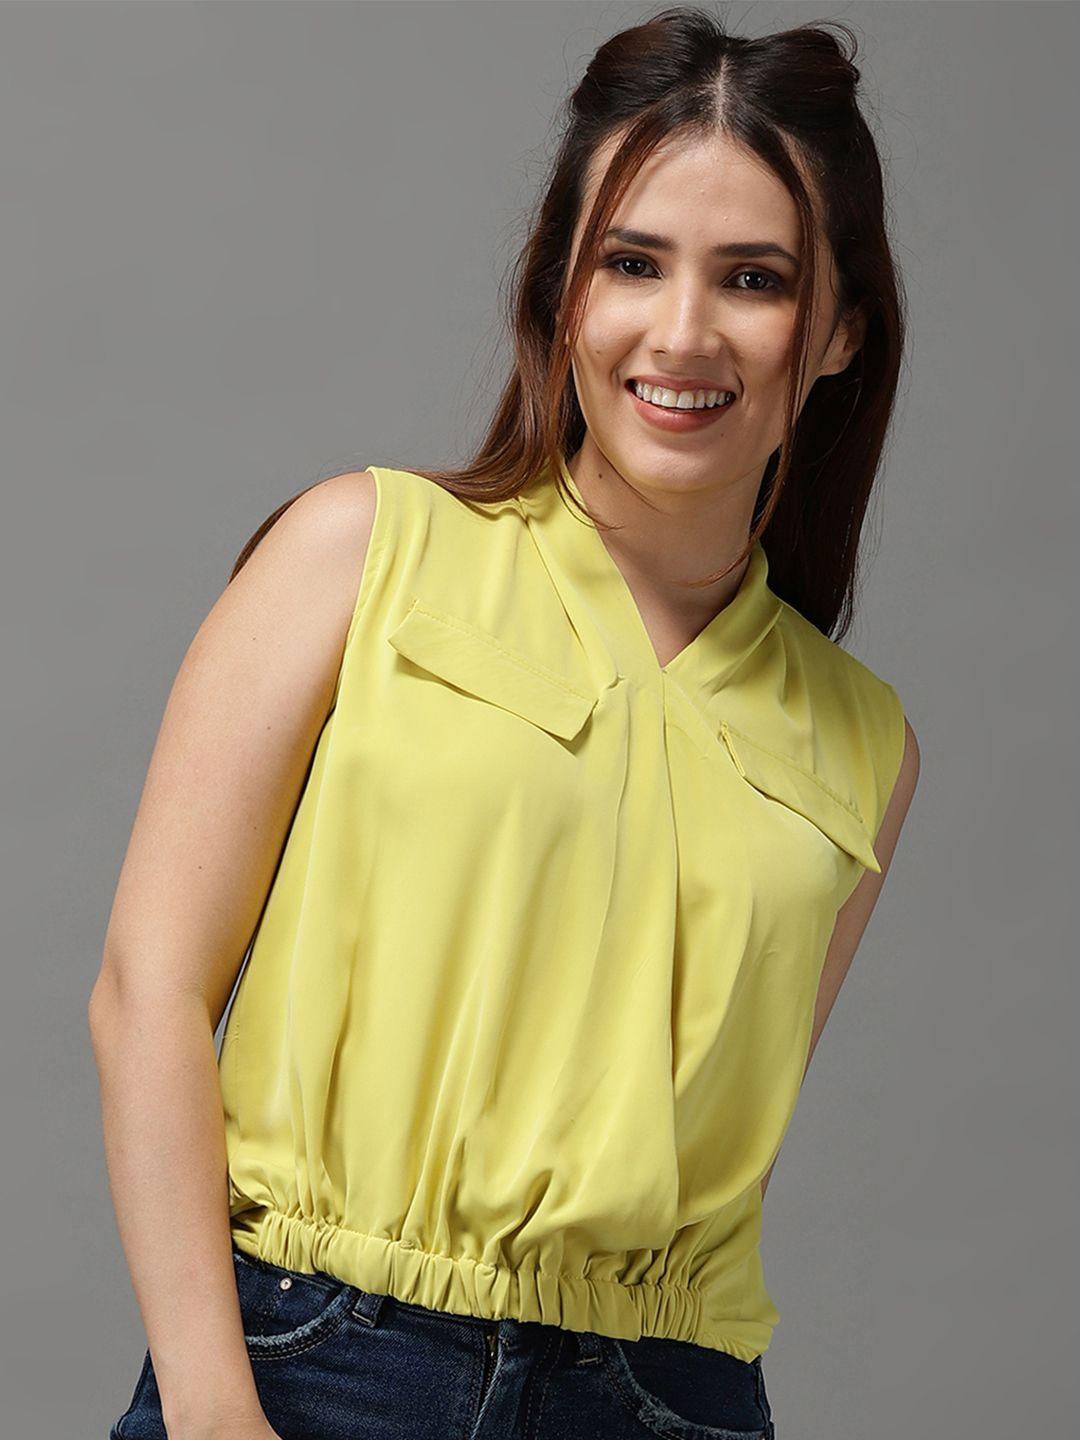 showoff yellow crepe shirt style top